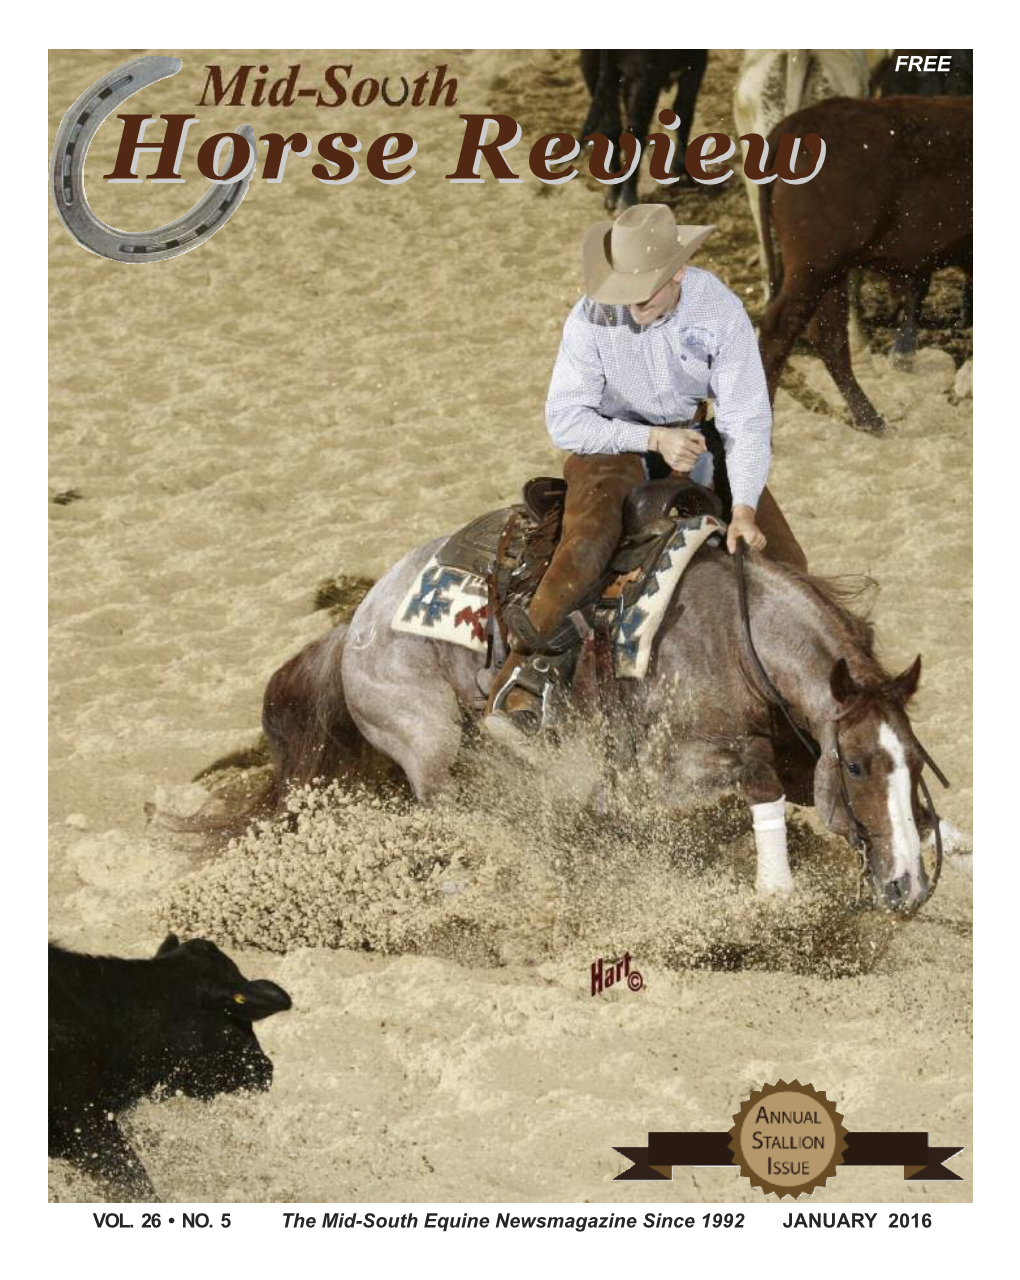 VOL. 26 • NO. 5 the Mid-South Equine Newsmagazine Since 1992 JANUARY 2016 2